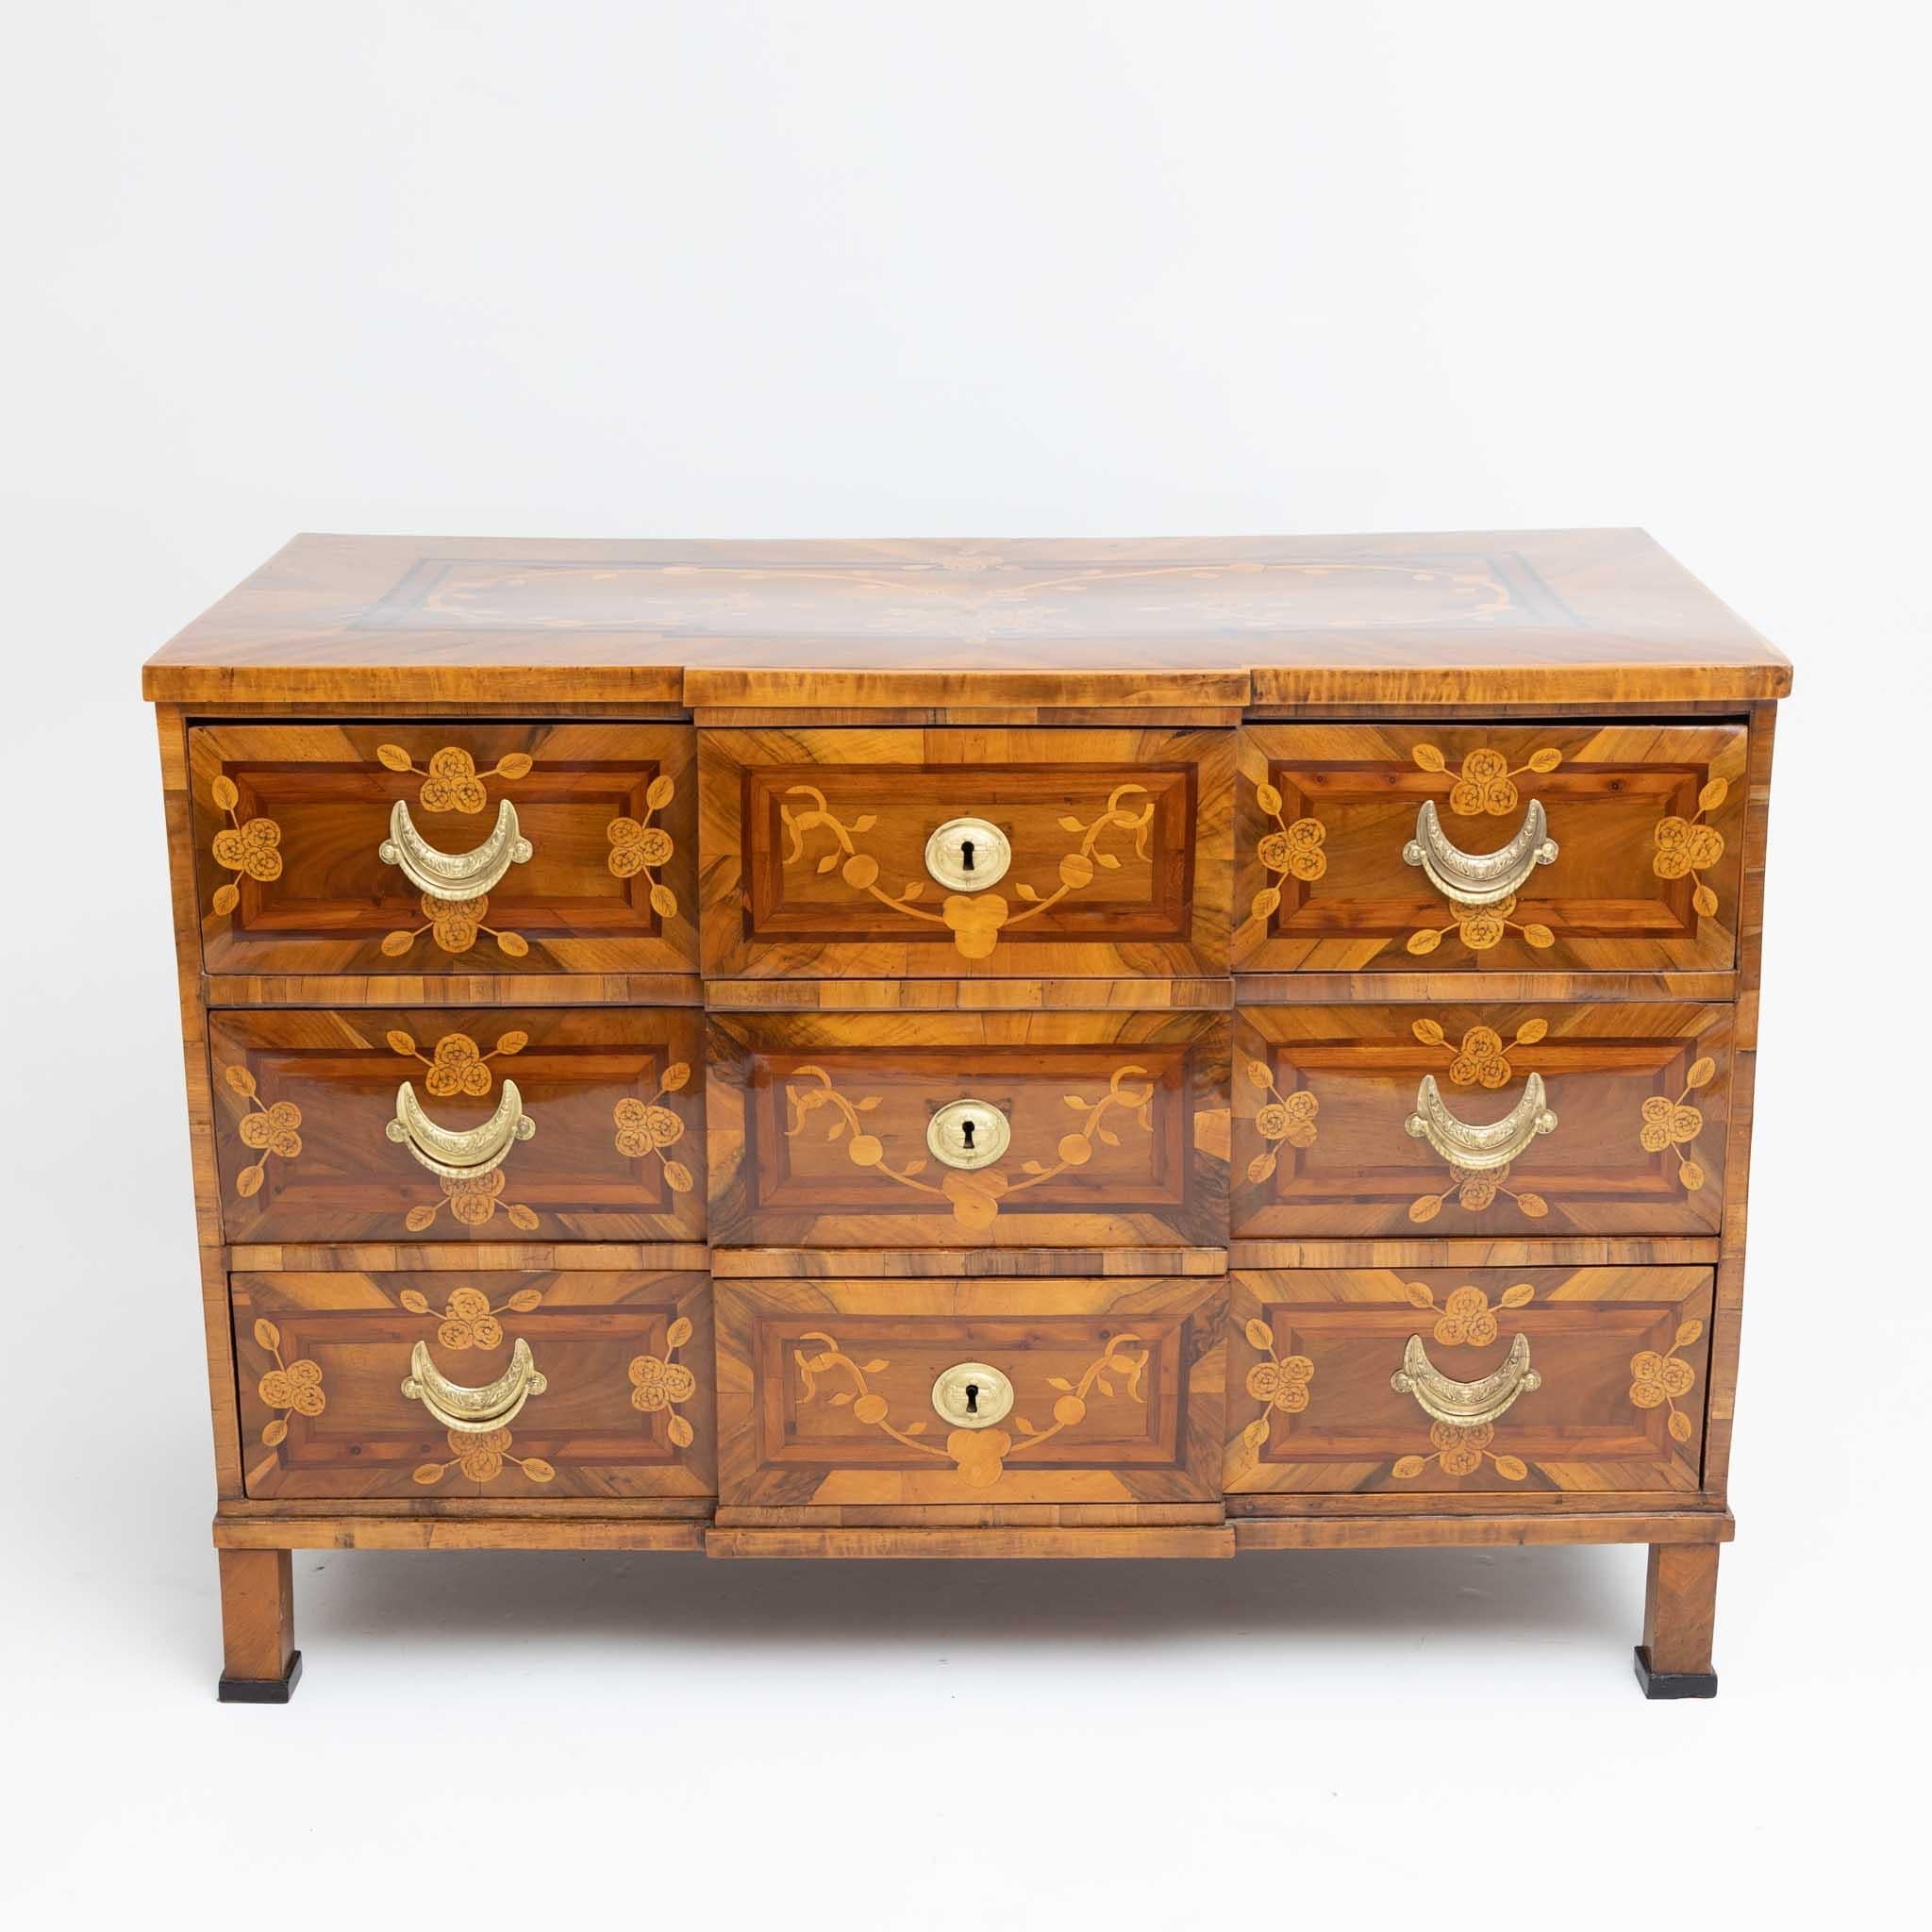 Louis Seize Marquetry Chest of Drawers, Walnut veneered, Late 18th Century For Sale 1